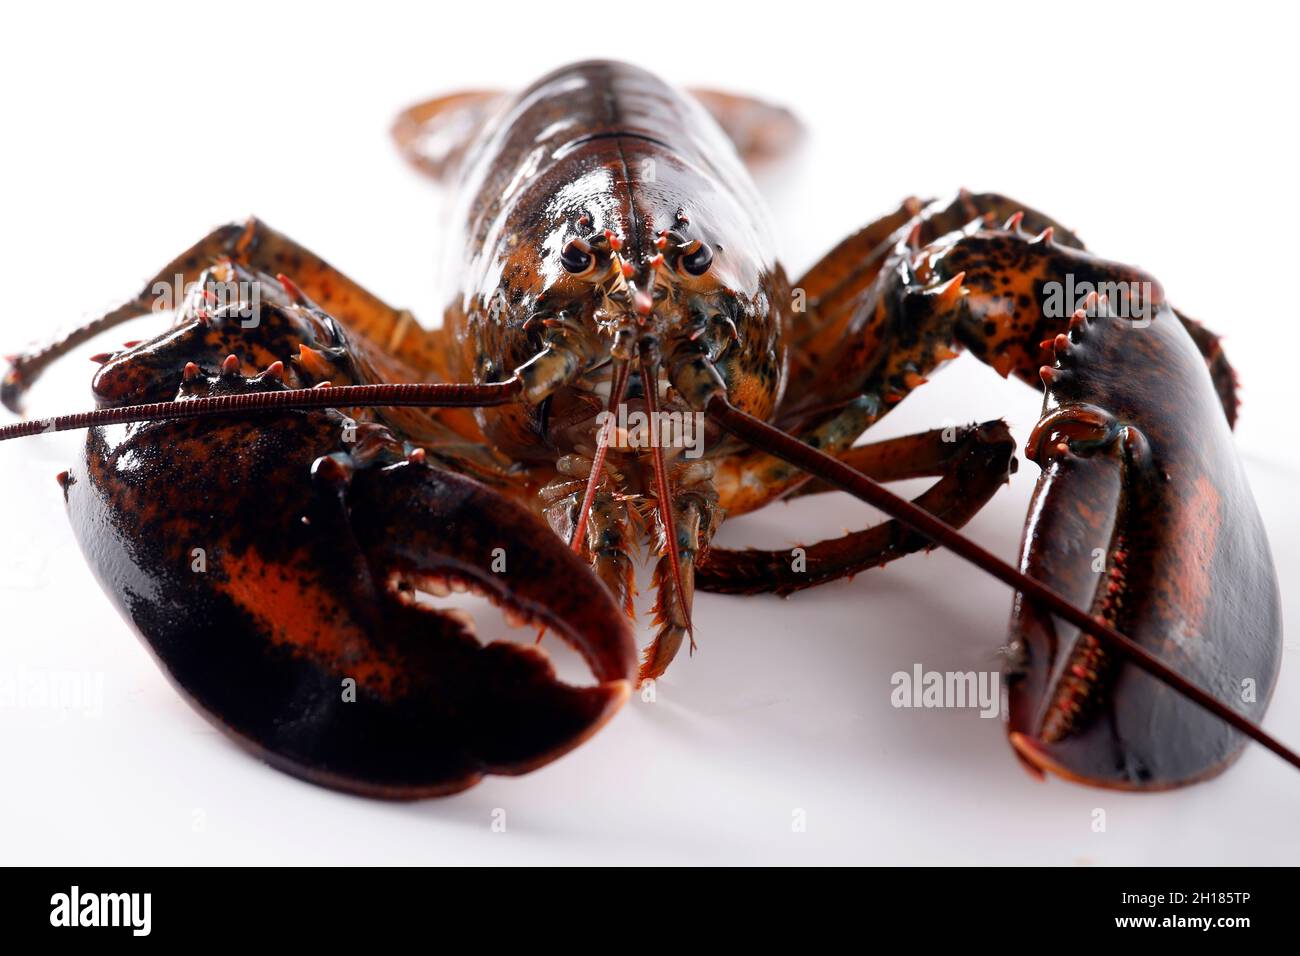 Lobster on white background Stock Photo